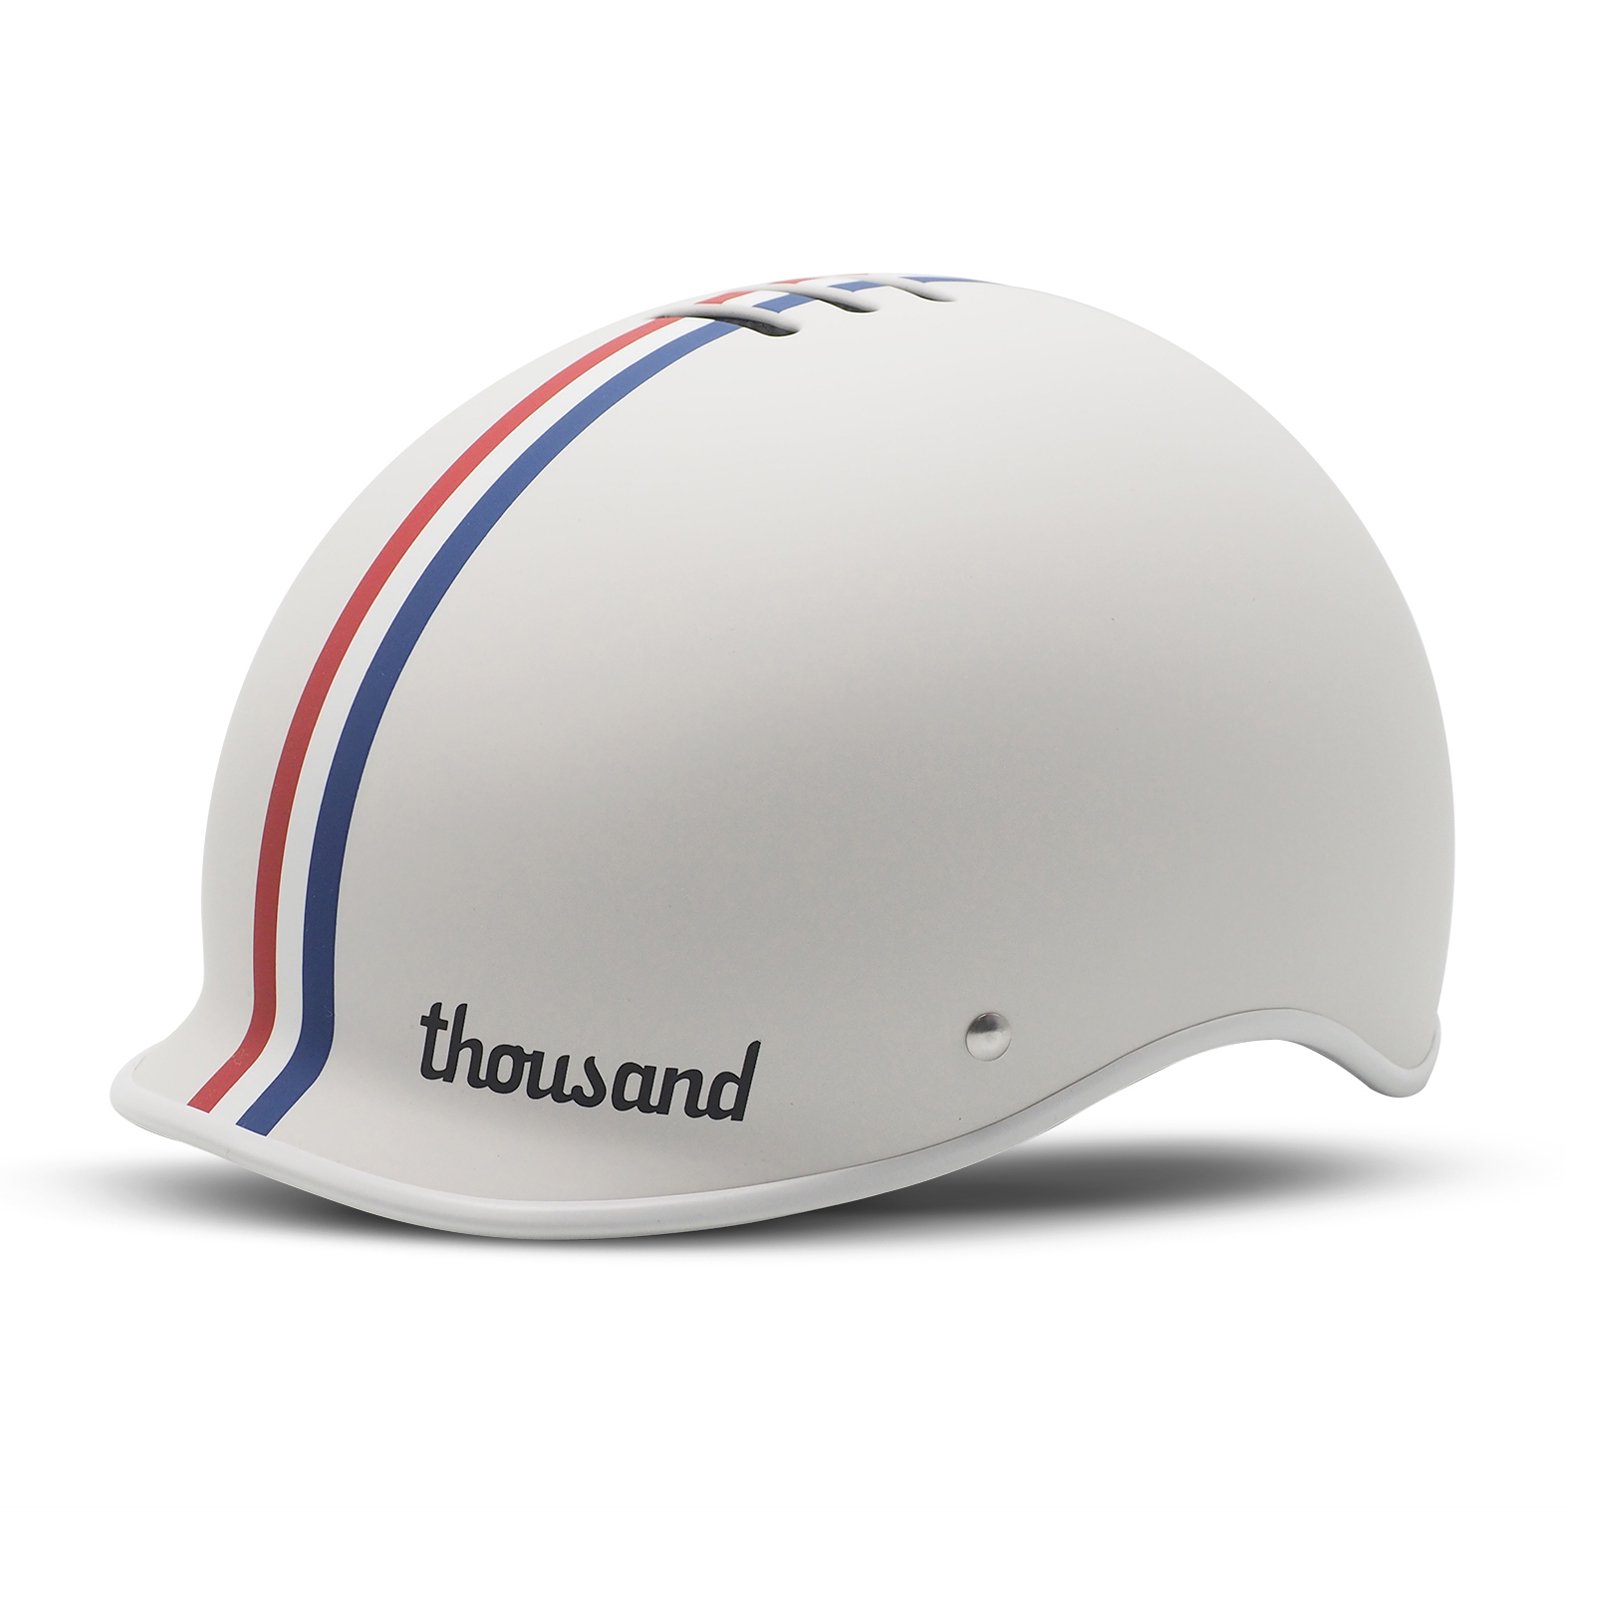 Thousand - Heritage Collection / Speedway Cream - ParkSIDER